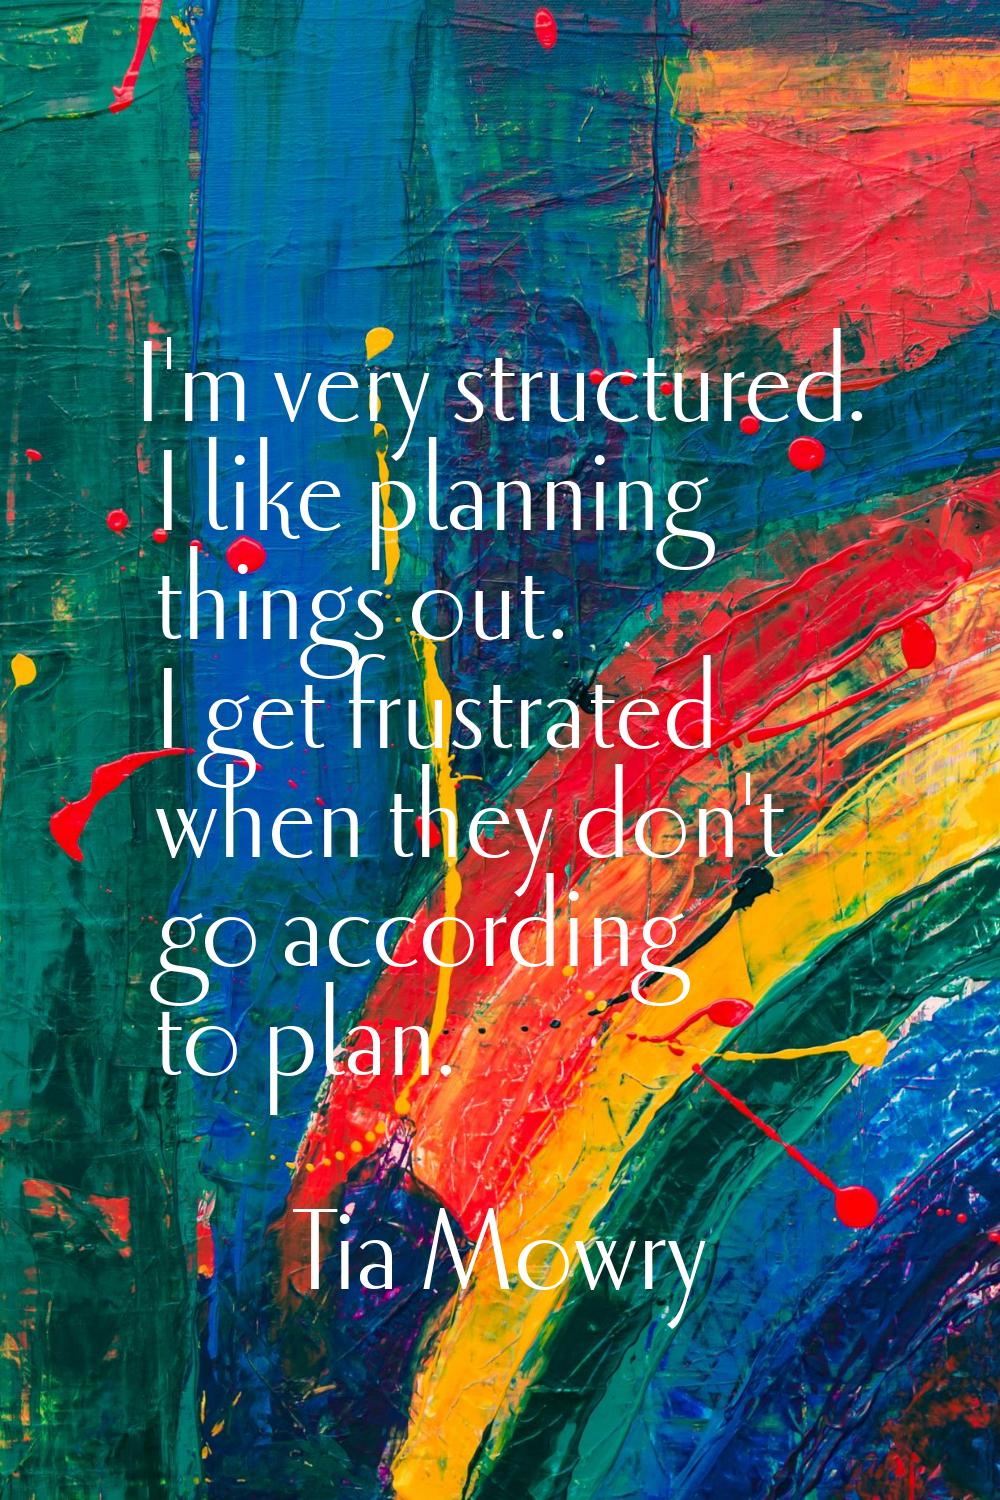 I'm very structured. I like planning things out. I get frustrated when they don't go according to p